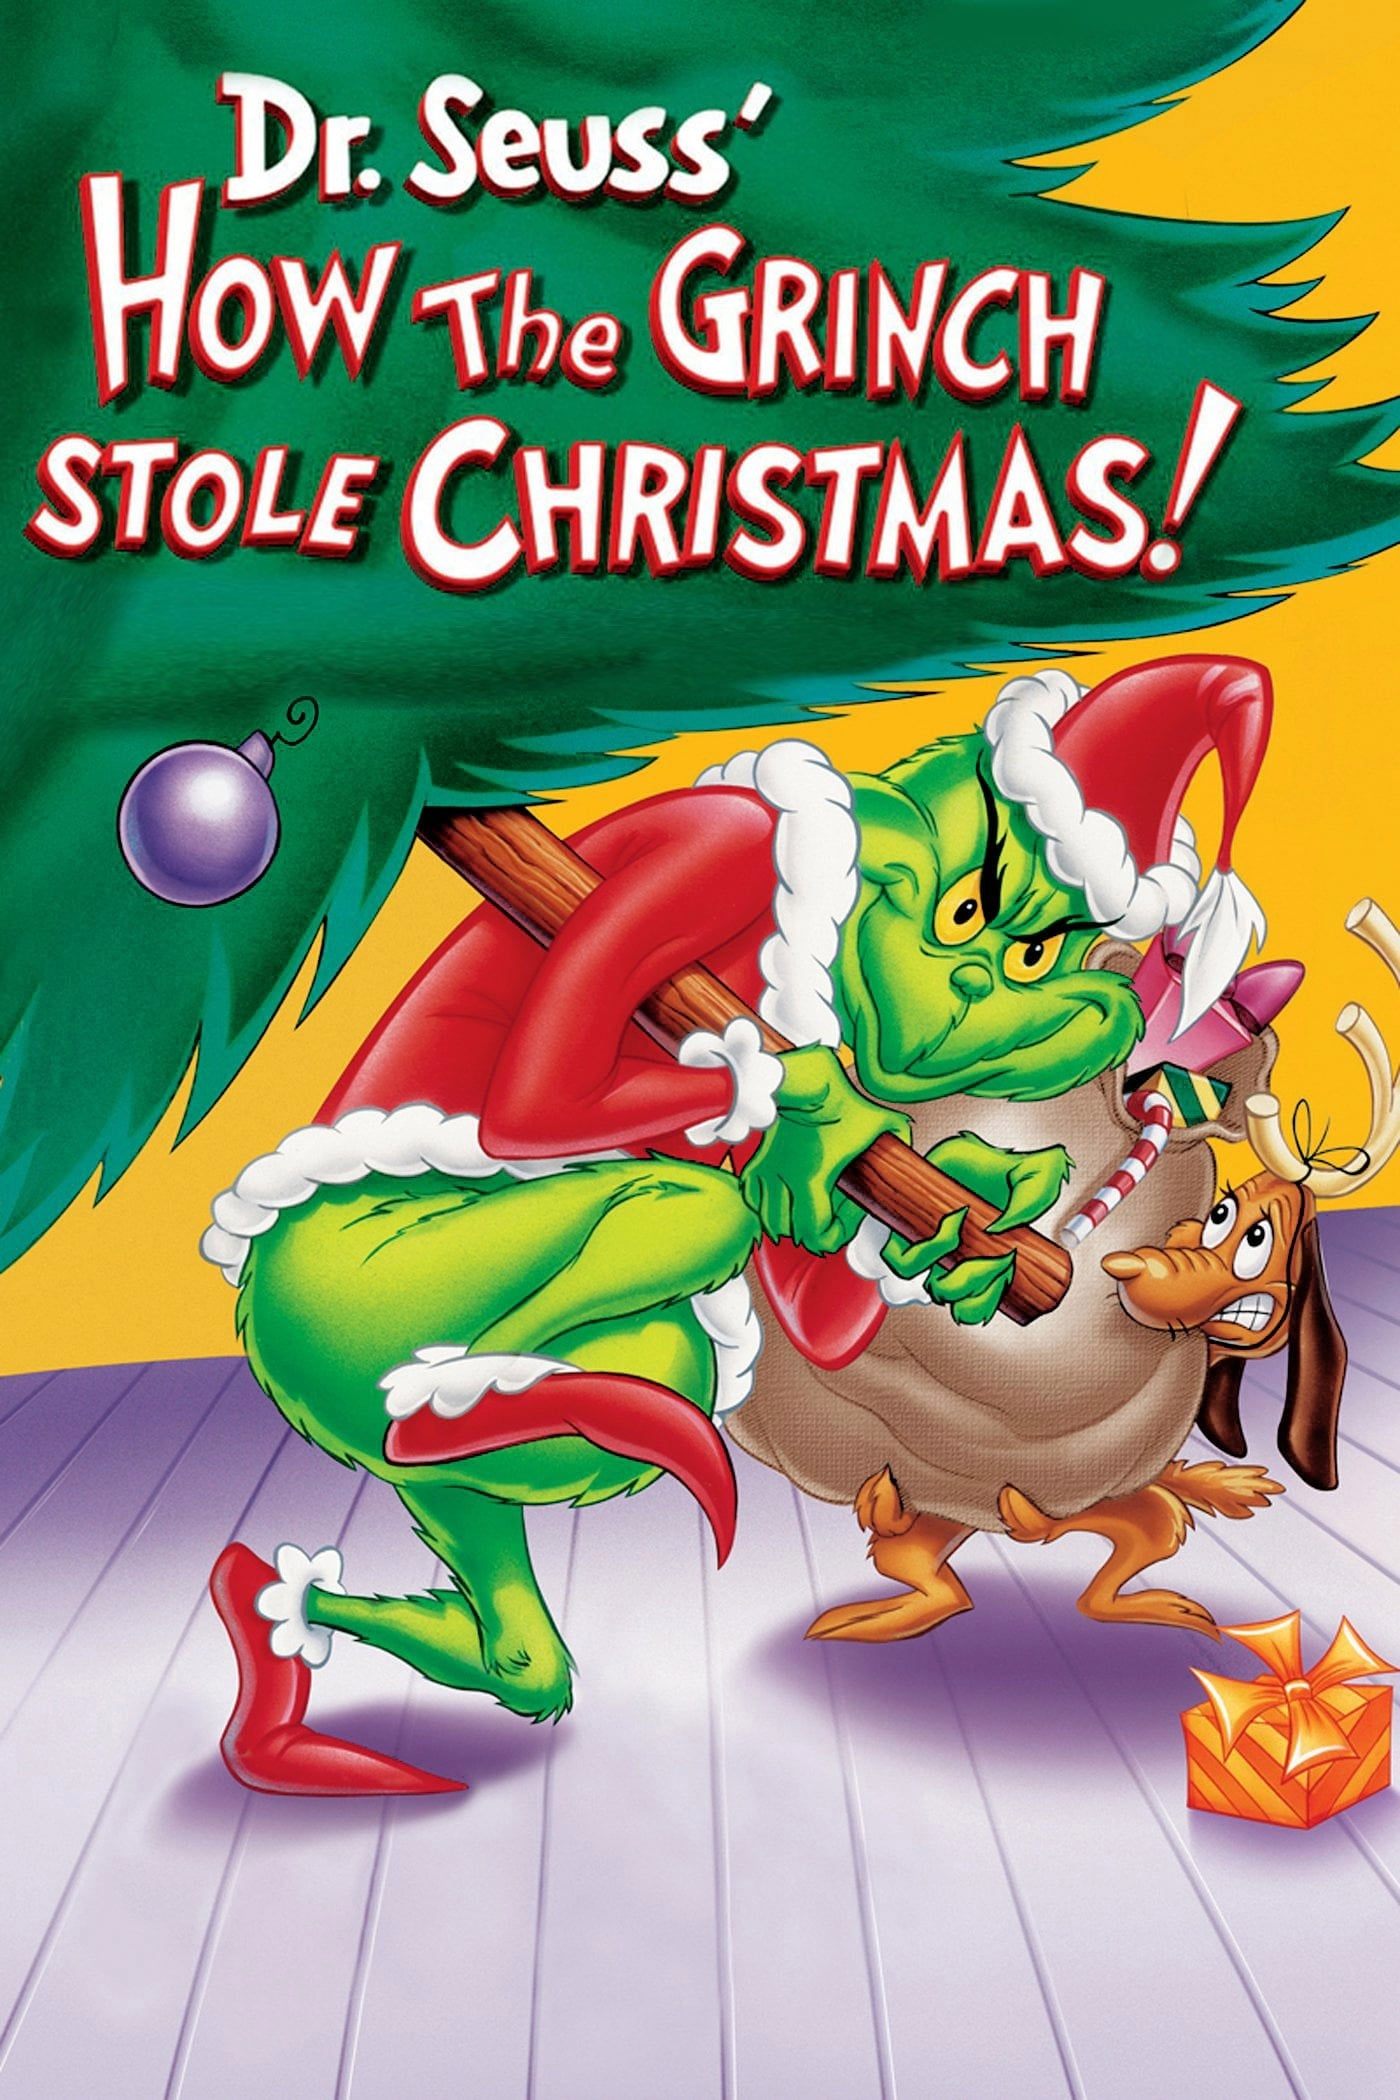 https://static.wikia.nocookie.net/international-entertainment-project/images/2/21/How_the_Grinch_Stole_Christmas%21_-_poster_%28English%29.jpg/revision/latest?cb=20231222011129